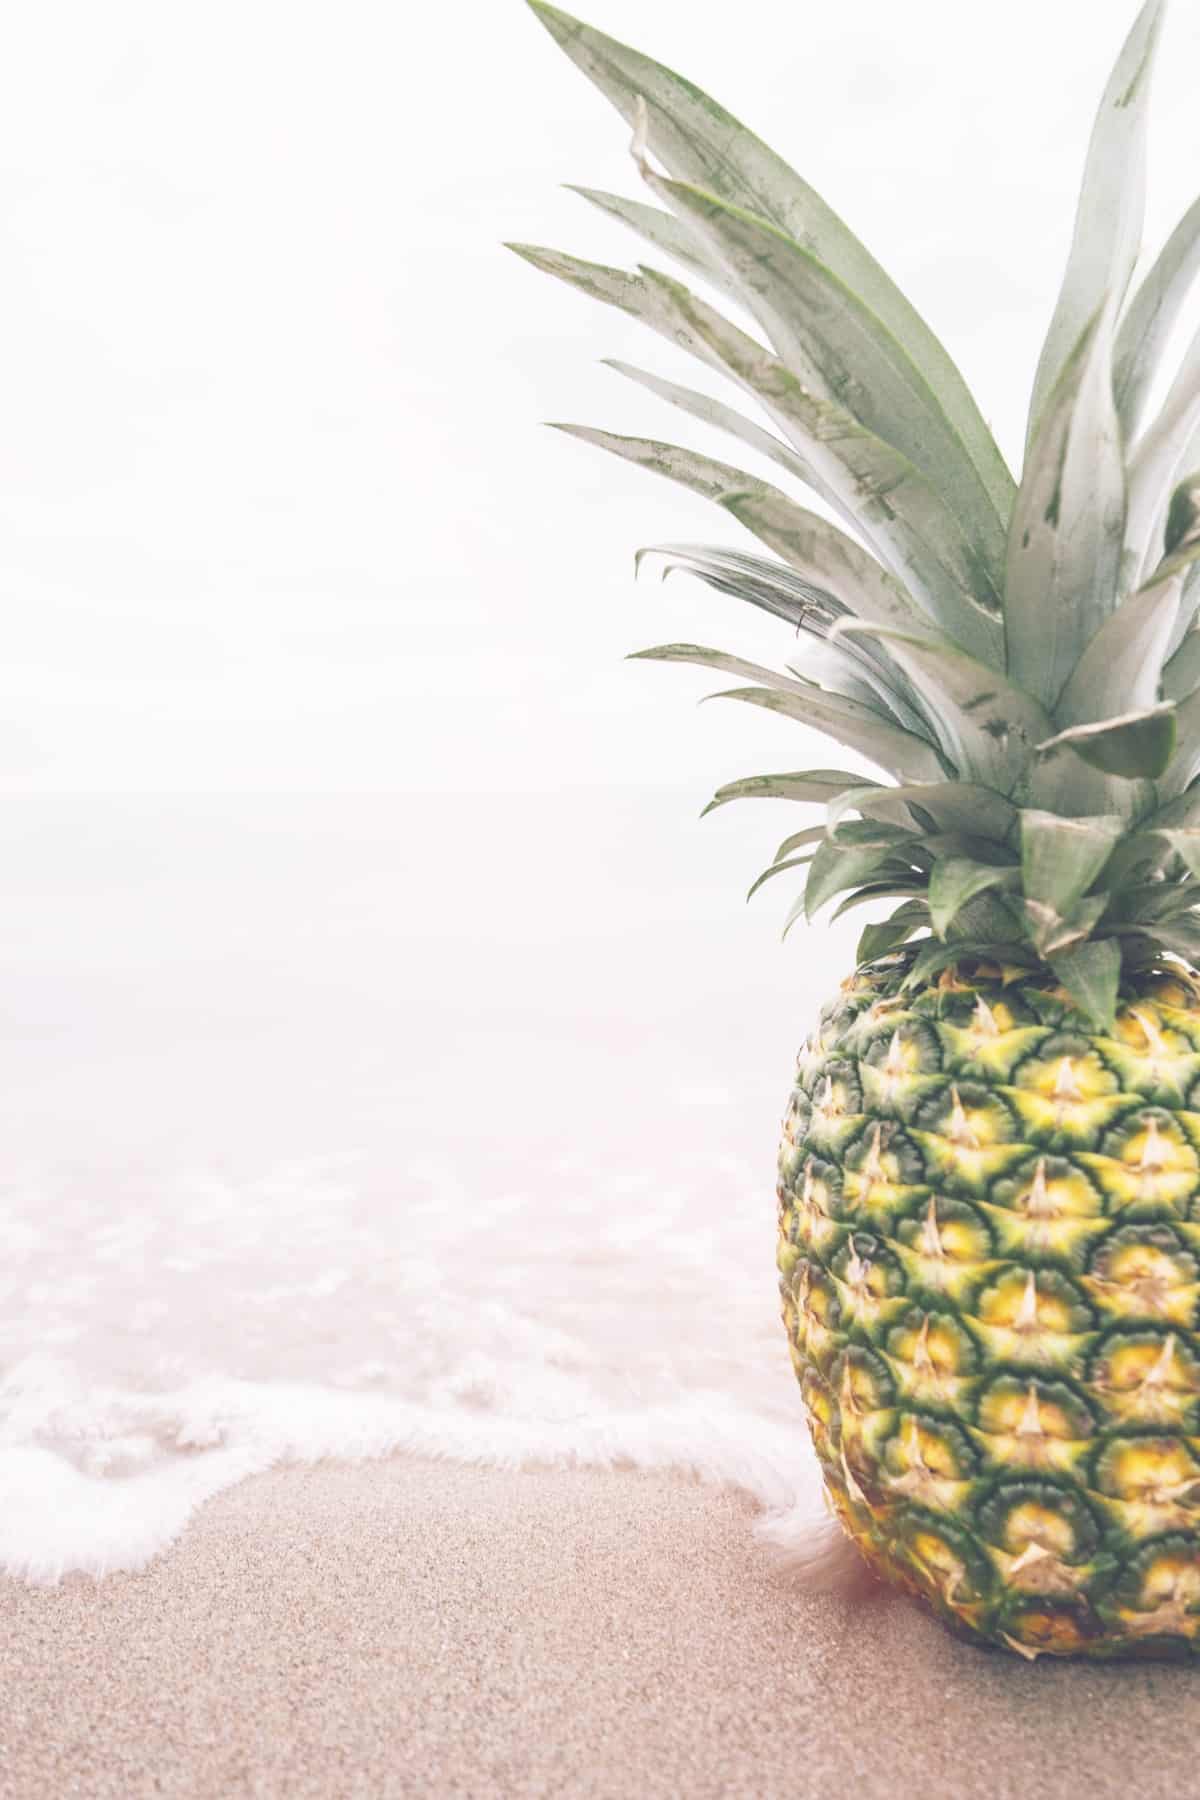 30 of the Sweetest Desktop and Smartphone Pineapple Wallpapers